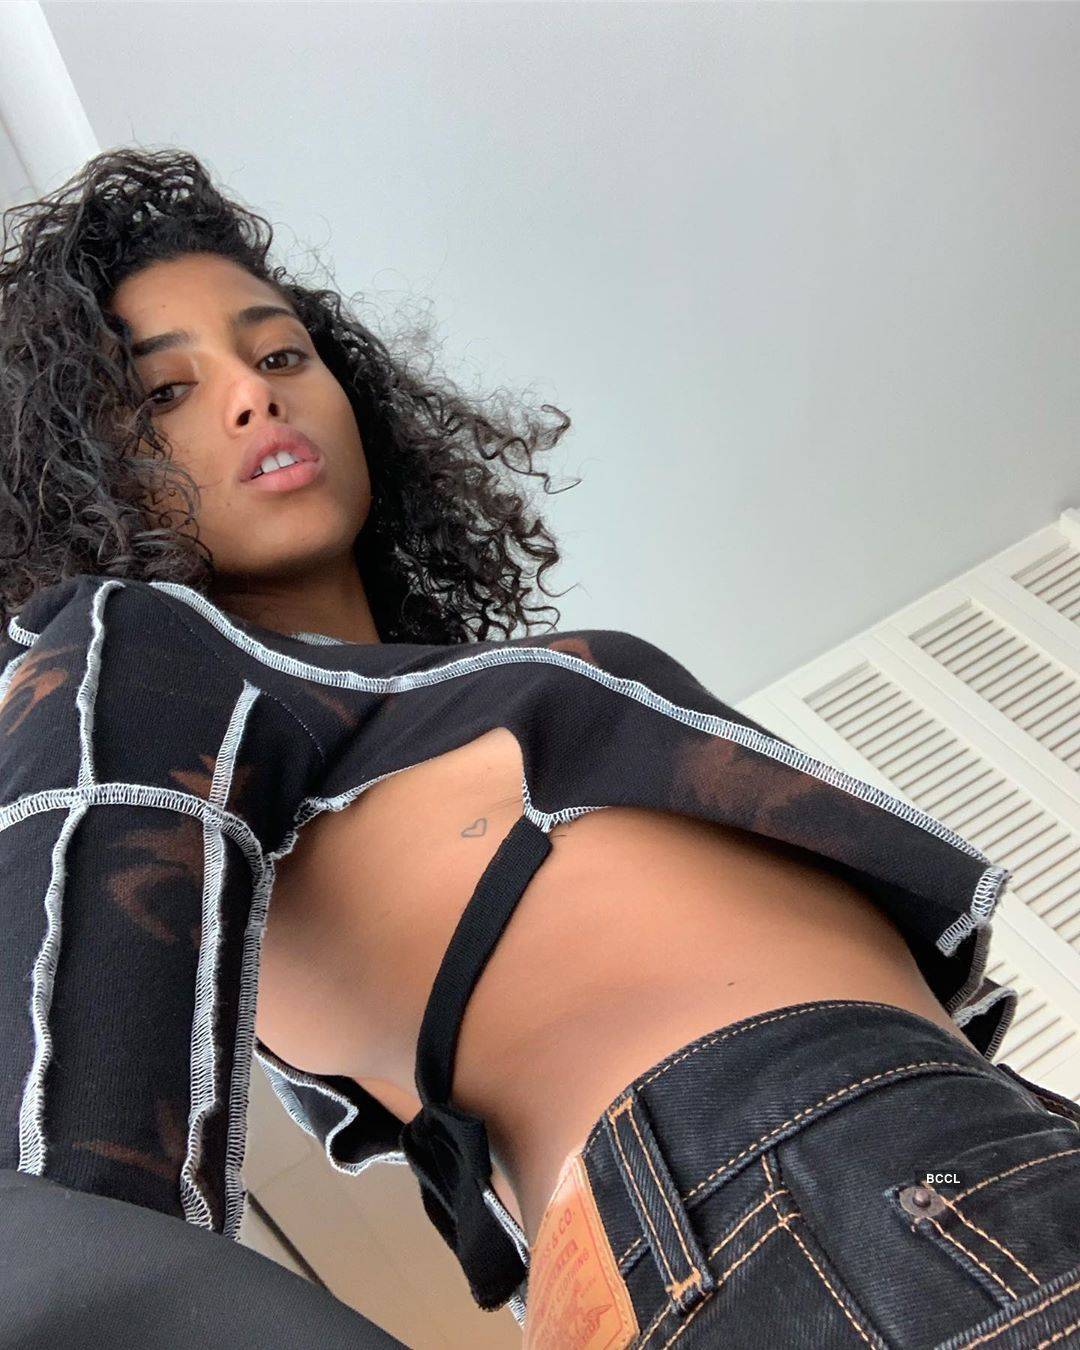 Imaan Hammam turns up the heat with her glamorous photoshoots